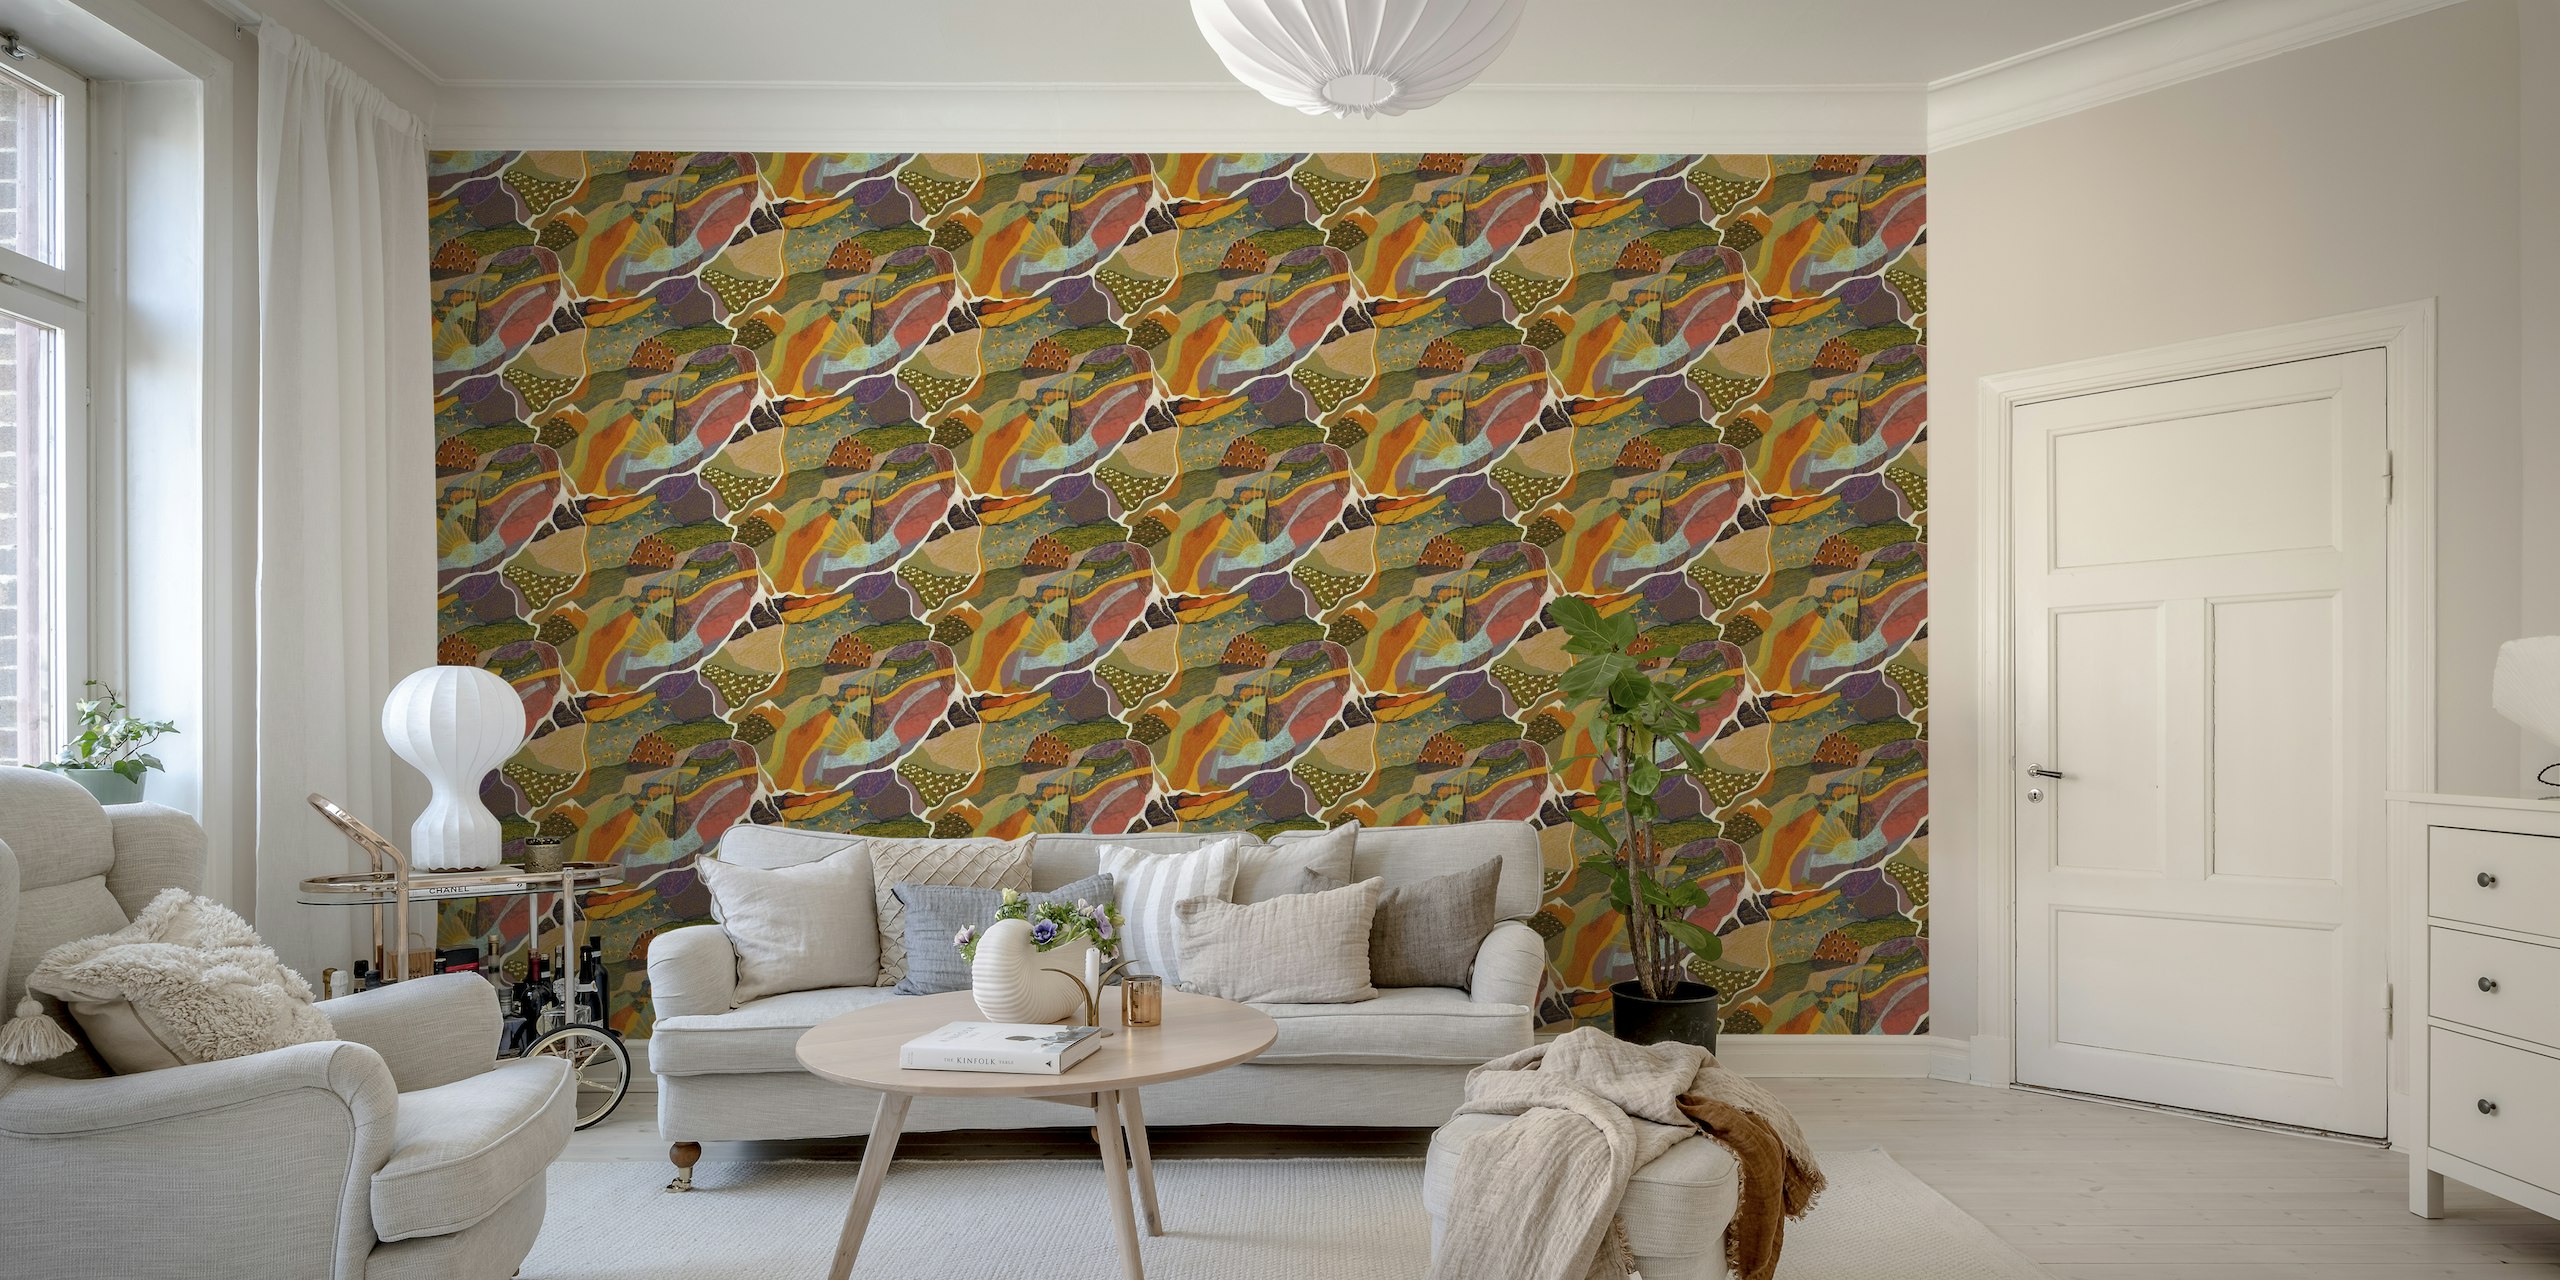 Abstract hillside pattern wall mural with rich earthy tones and artistic landscape design